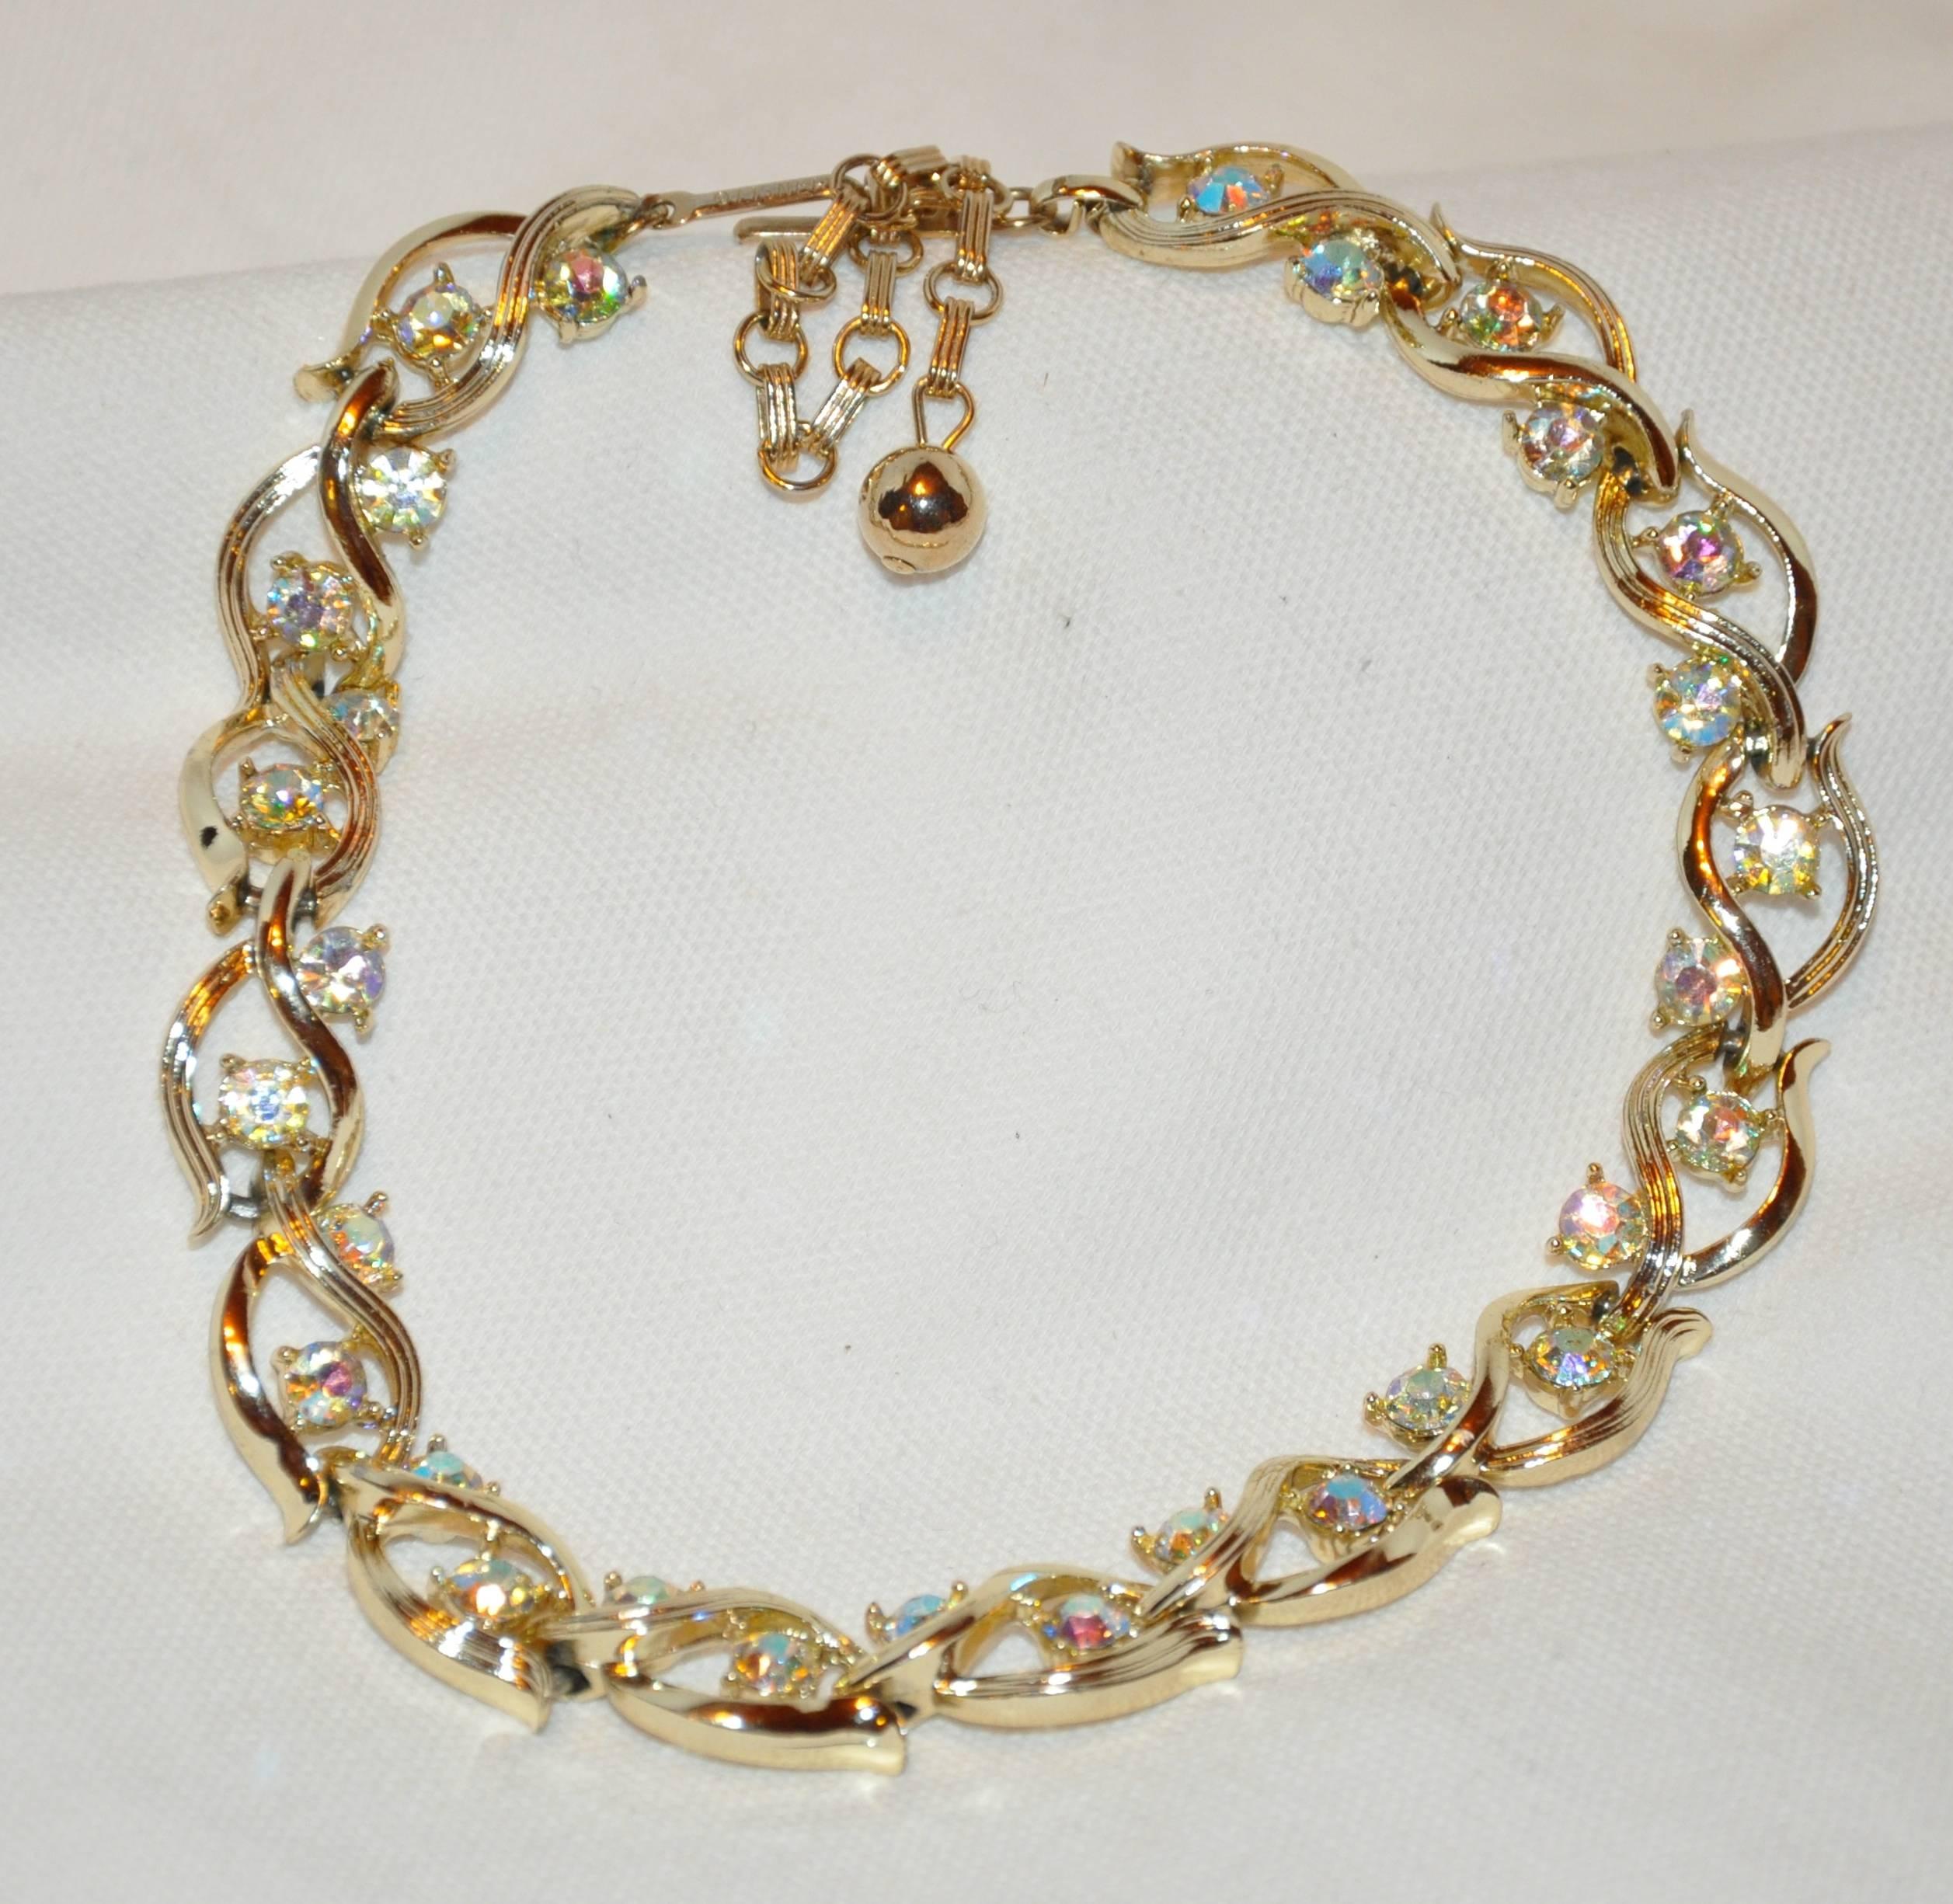          Lisner wonderful etched gilded gold vermeil finish hardware accented with multi-colored faux diamonds measures 12 1/2 inches to 16 1/2 inches depending how you desired the necklace to drape. The width measures 1/2 inch.